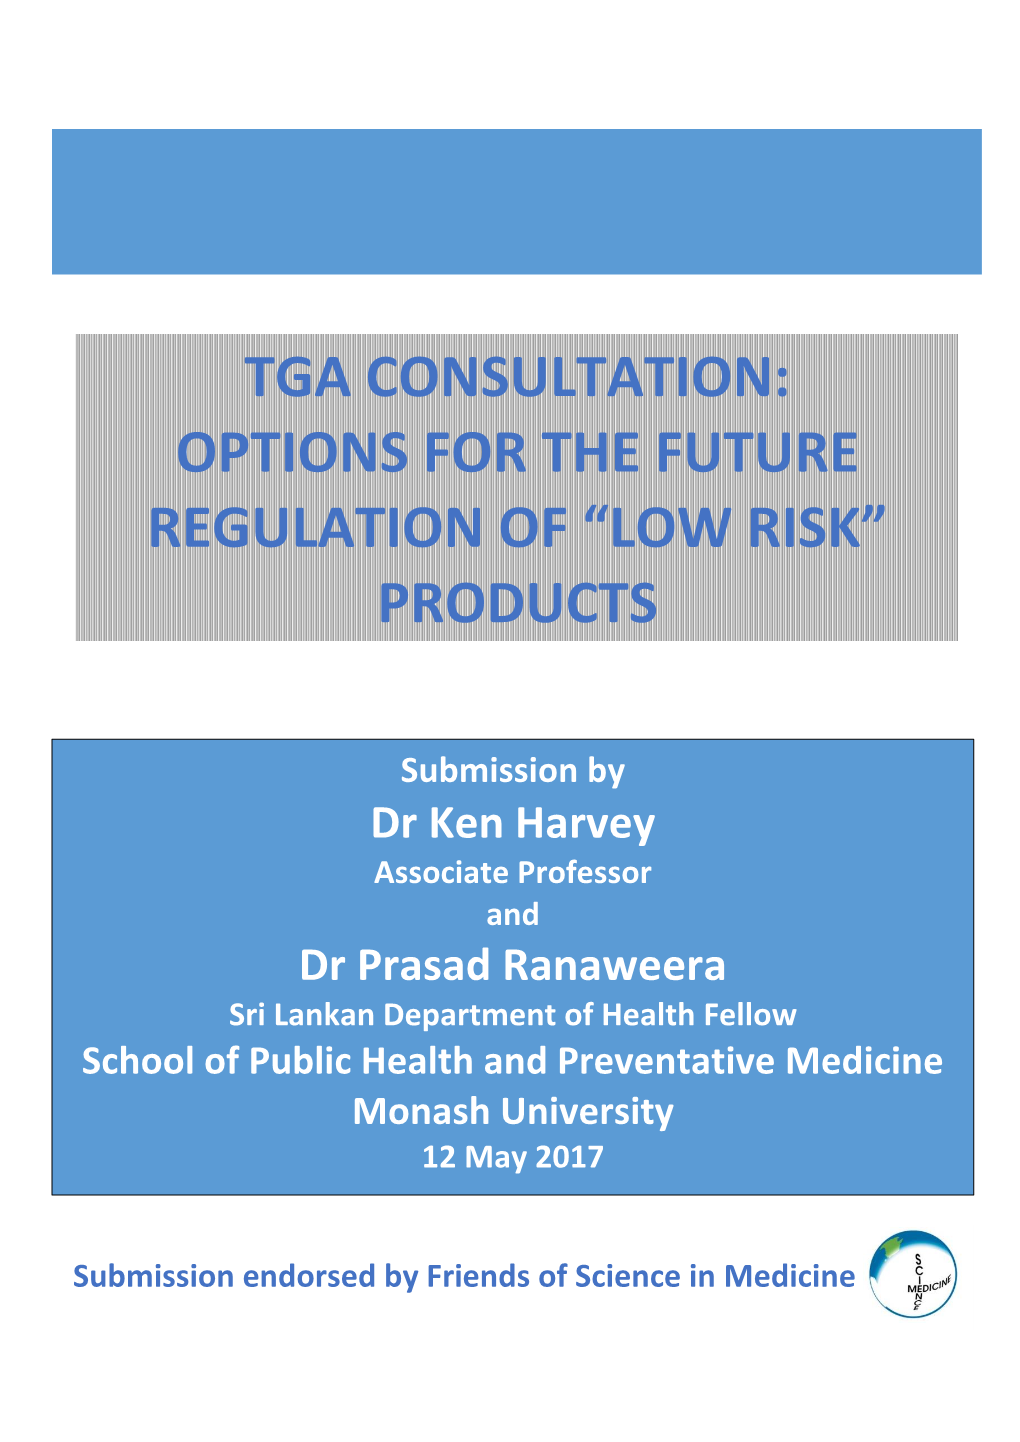 Options for the Future Regulation of 'Low Risk' Products